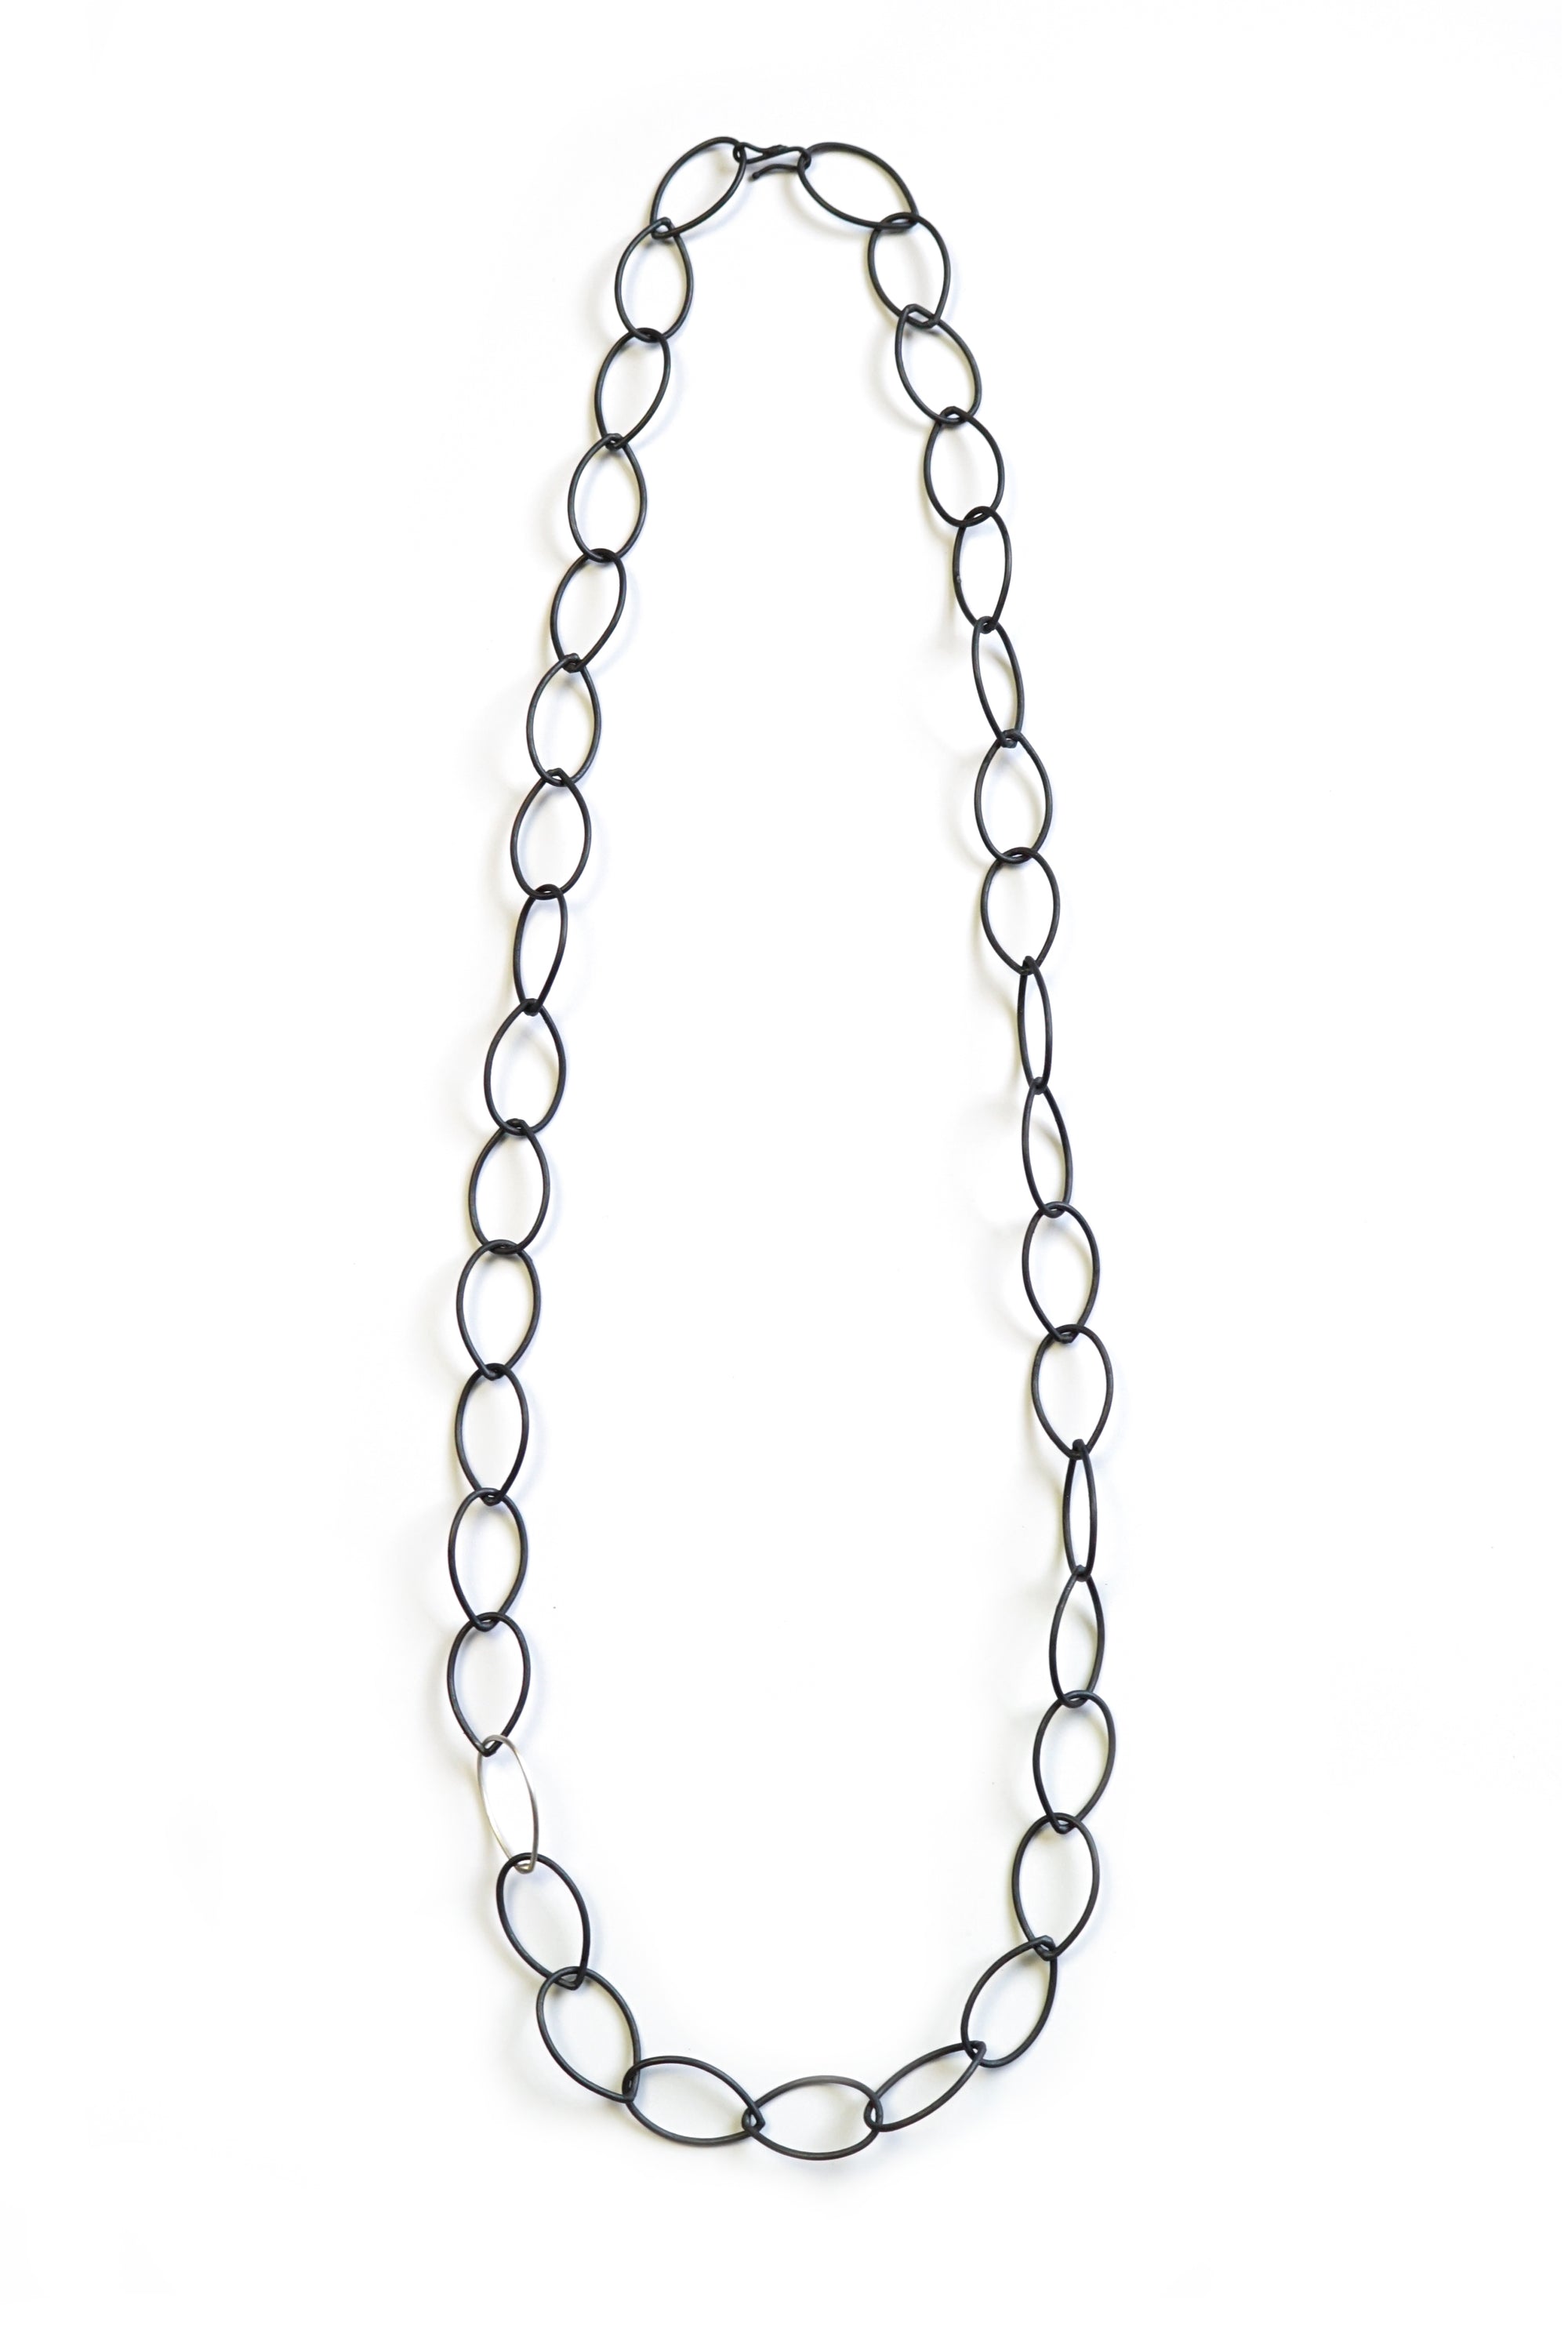 Alice necklace - steel with silver accent